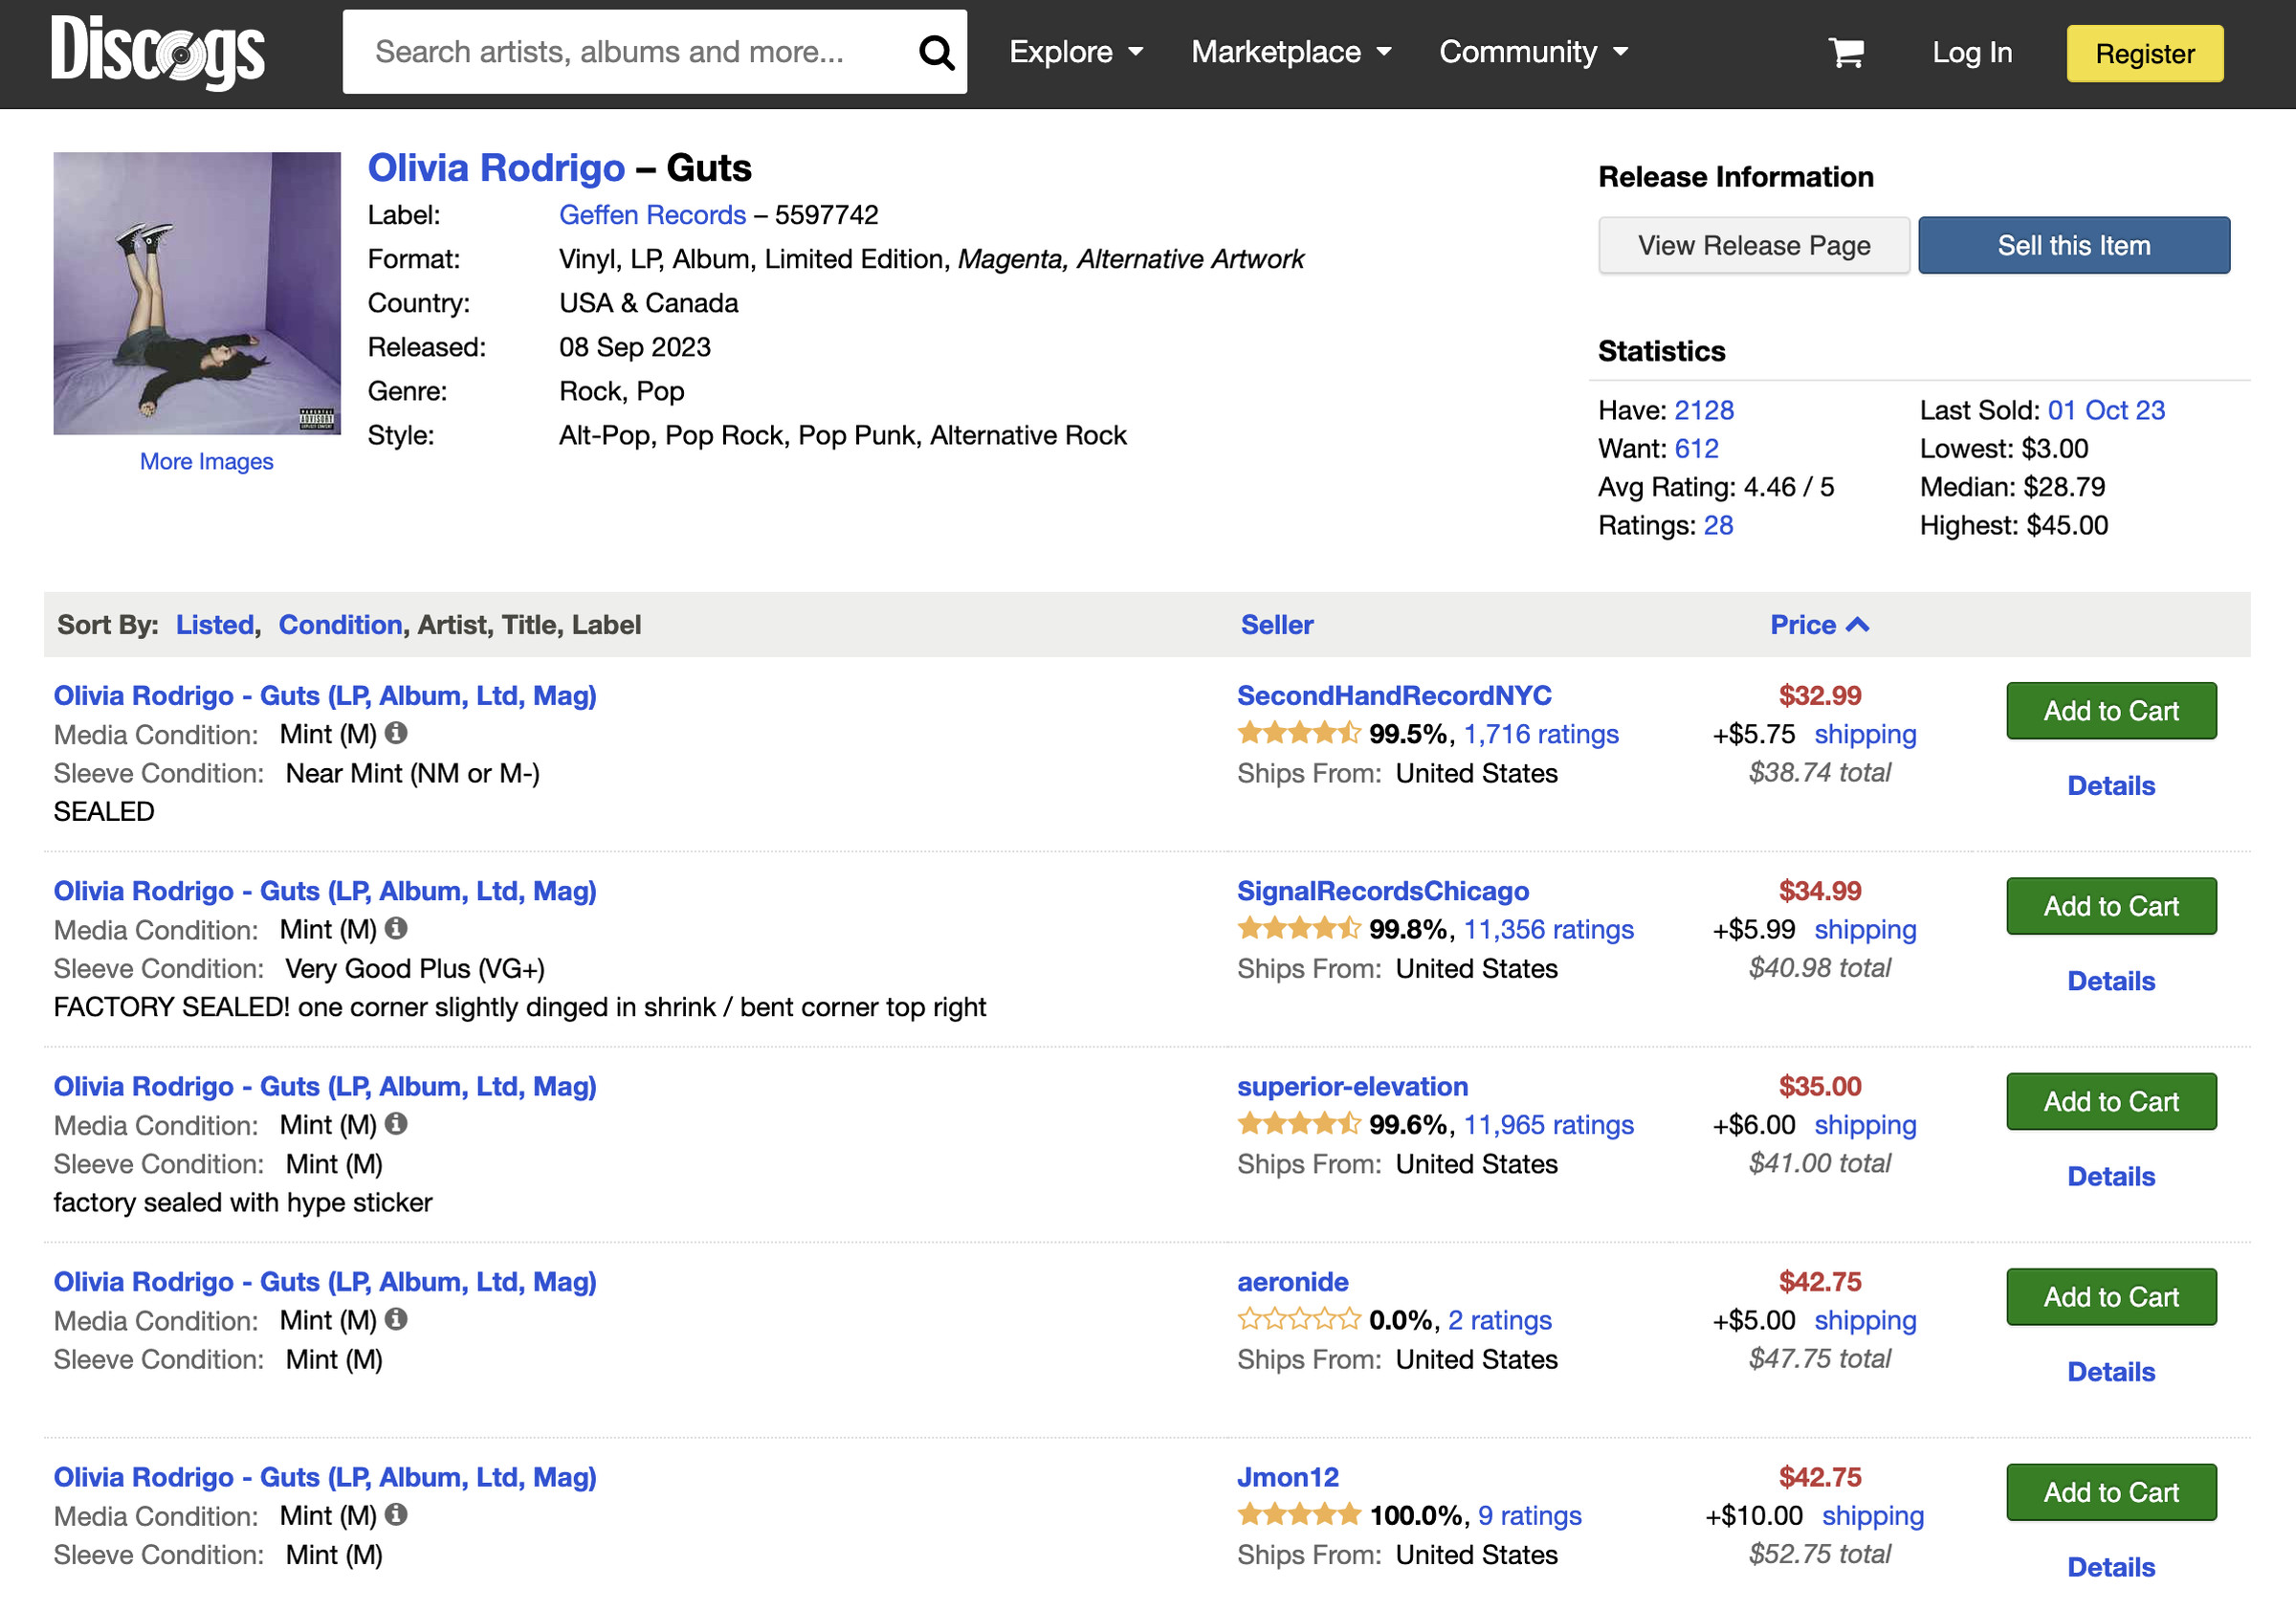 Discogs’ marketplace page showing copies of Olivia Rodrigo’s Guts for sale. The prices are generally higher than buying the album elsewhere.